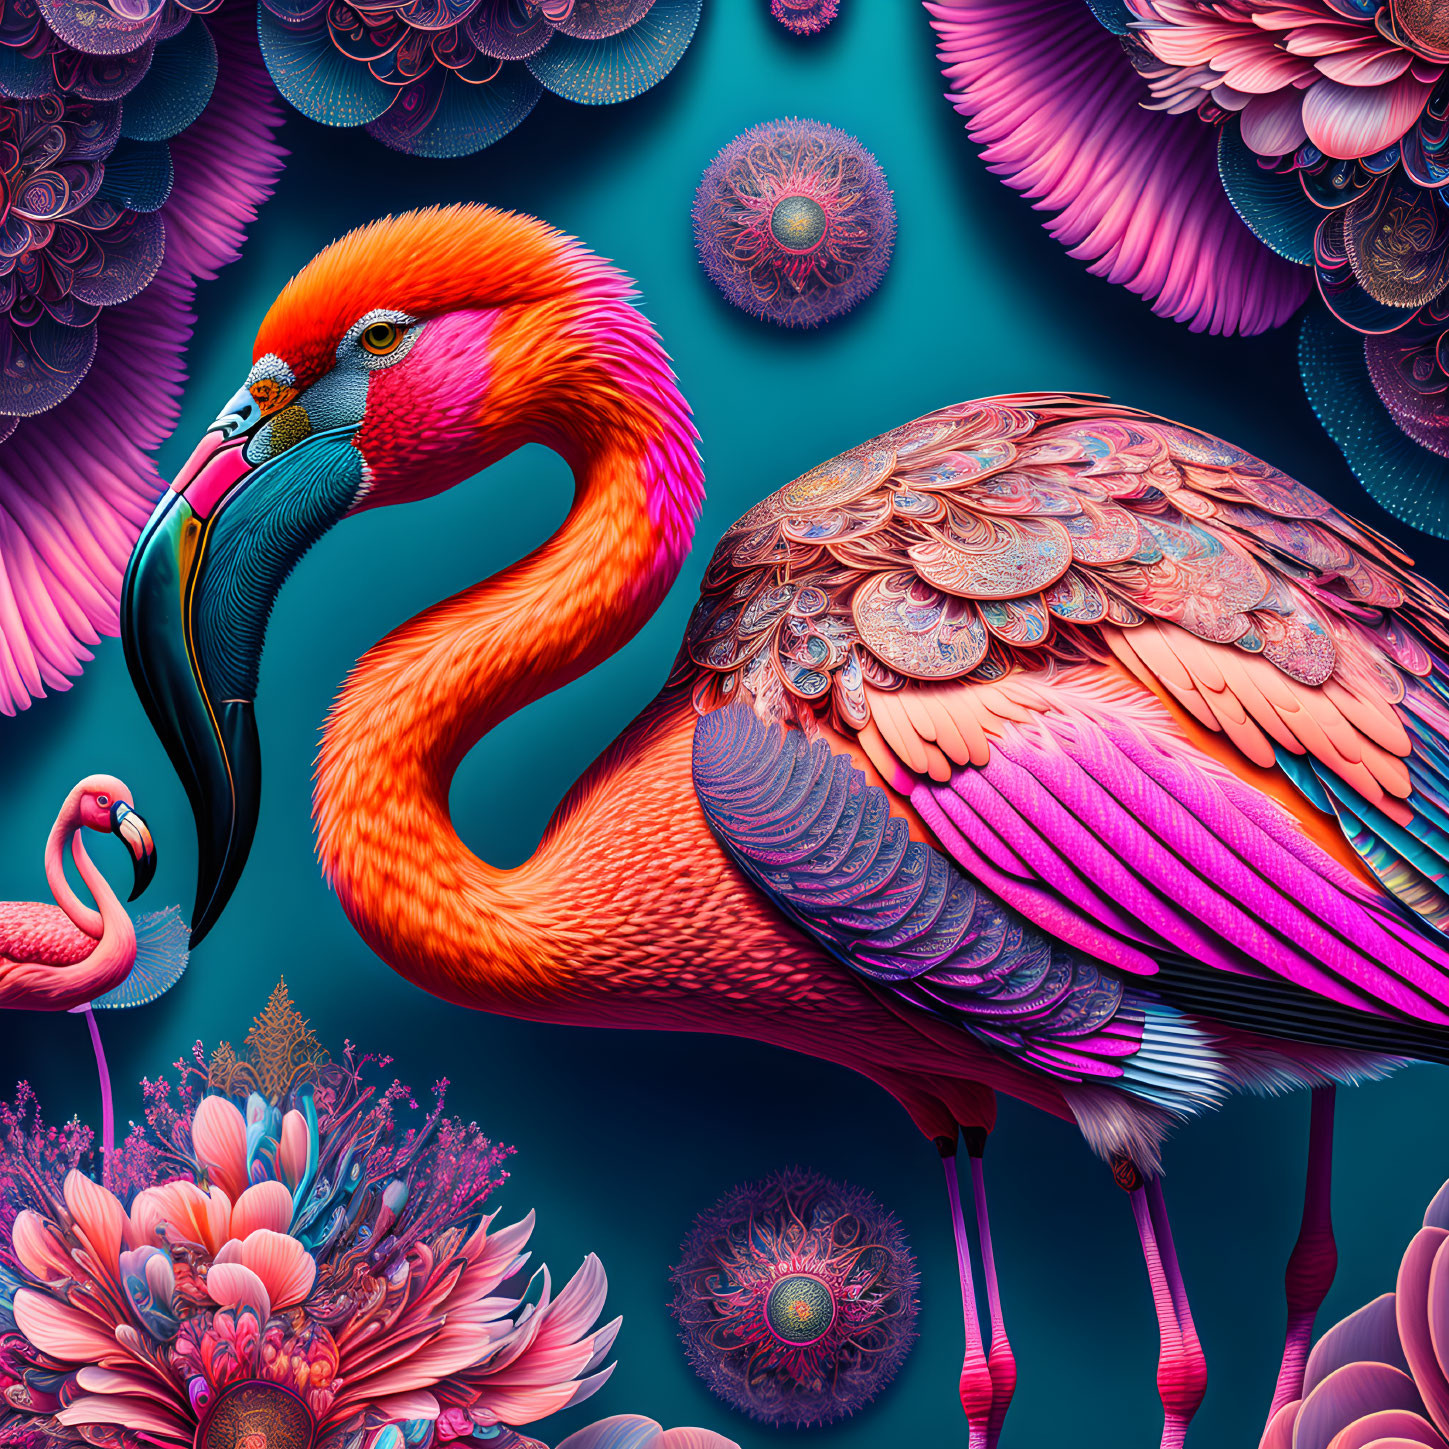 Detailed digital artwork of stylized pink flamingos in ornate tropical setting